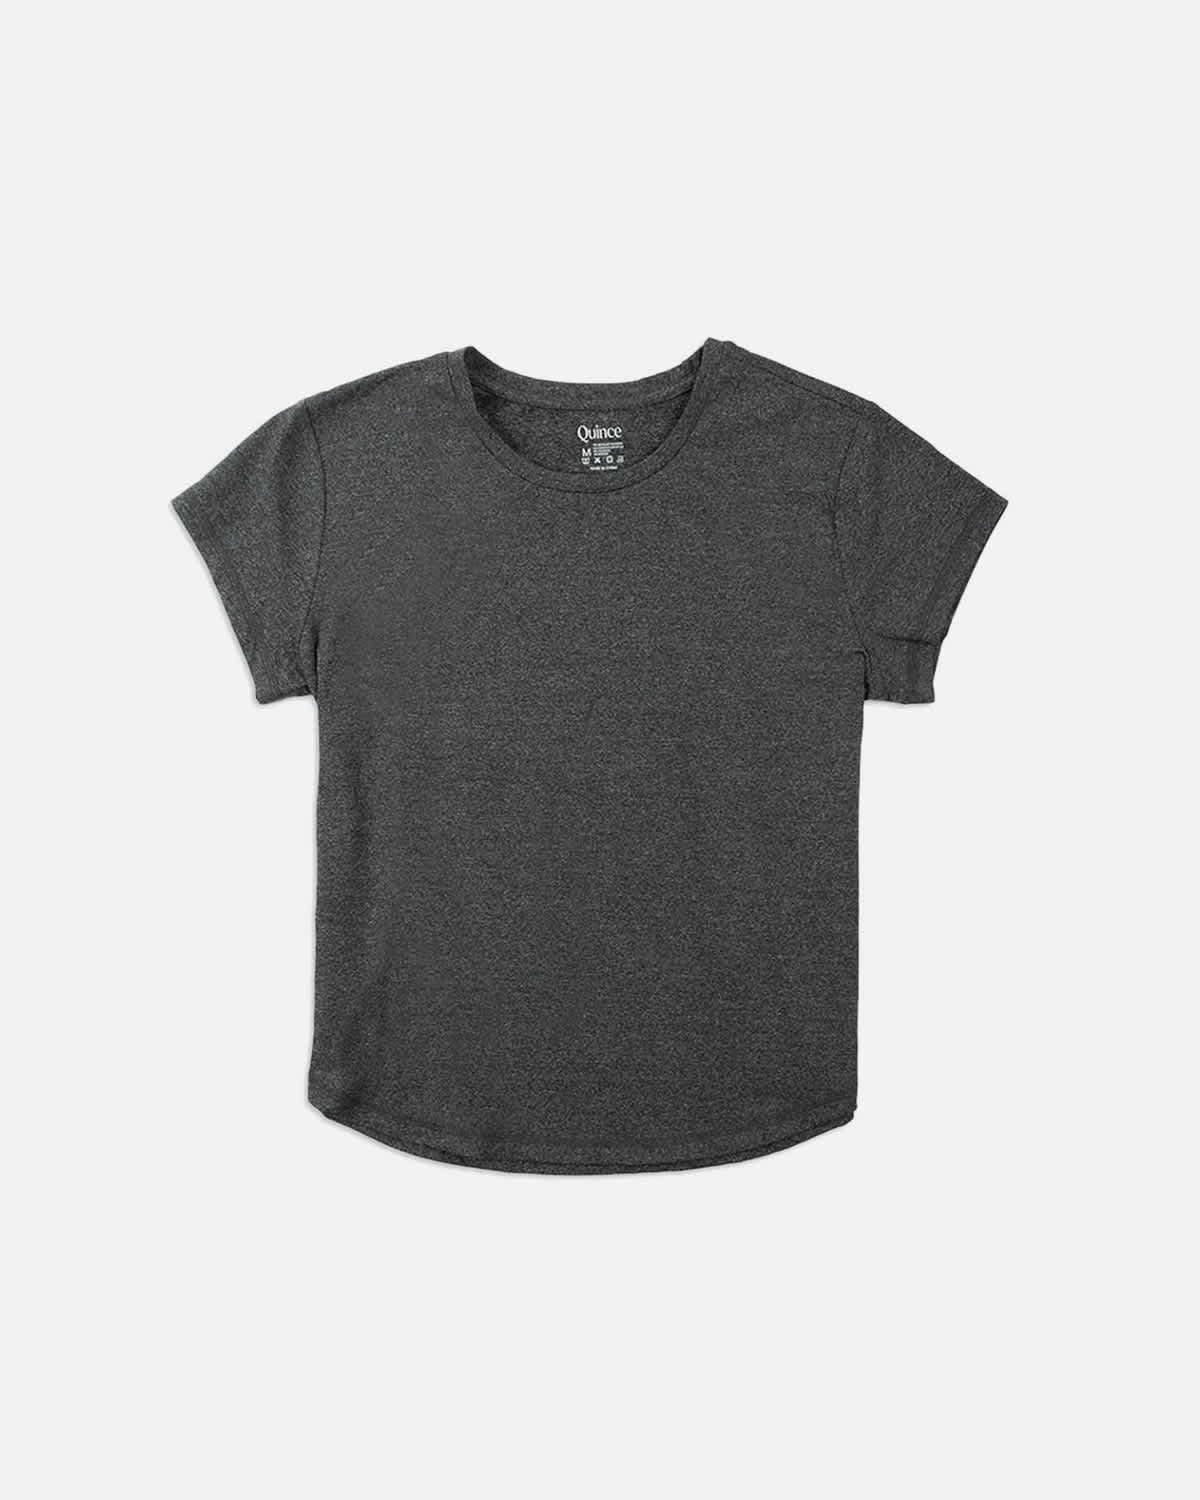 Flowknit Ultra-Soft Performance Tee - Charcoal